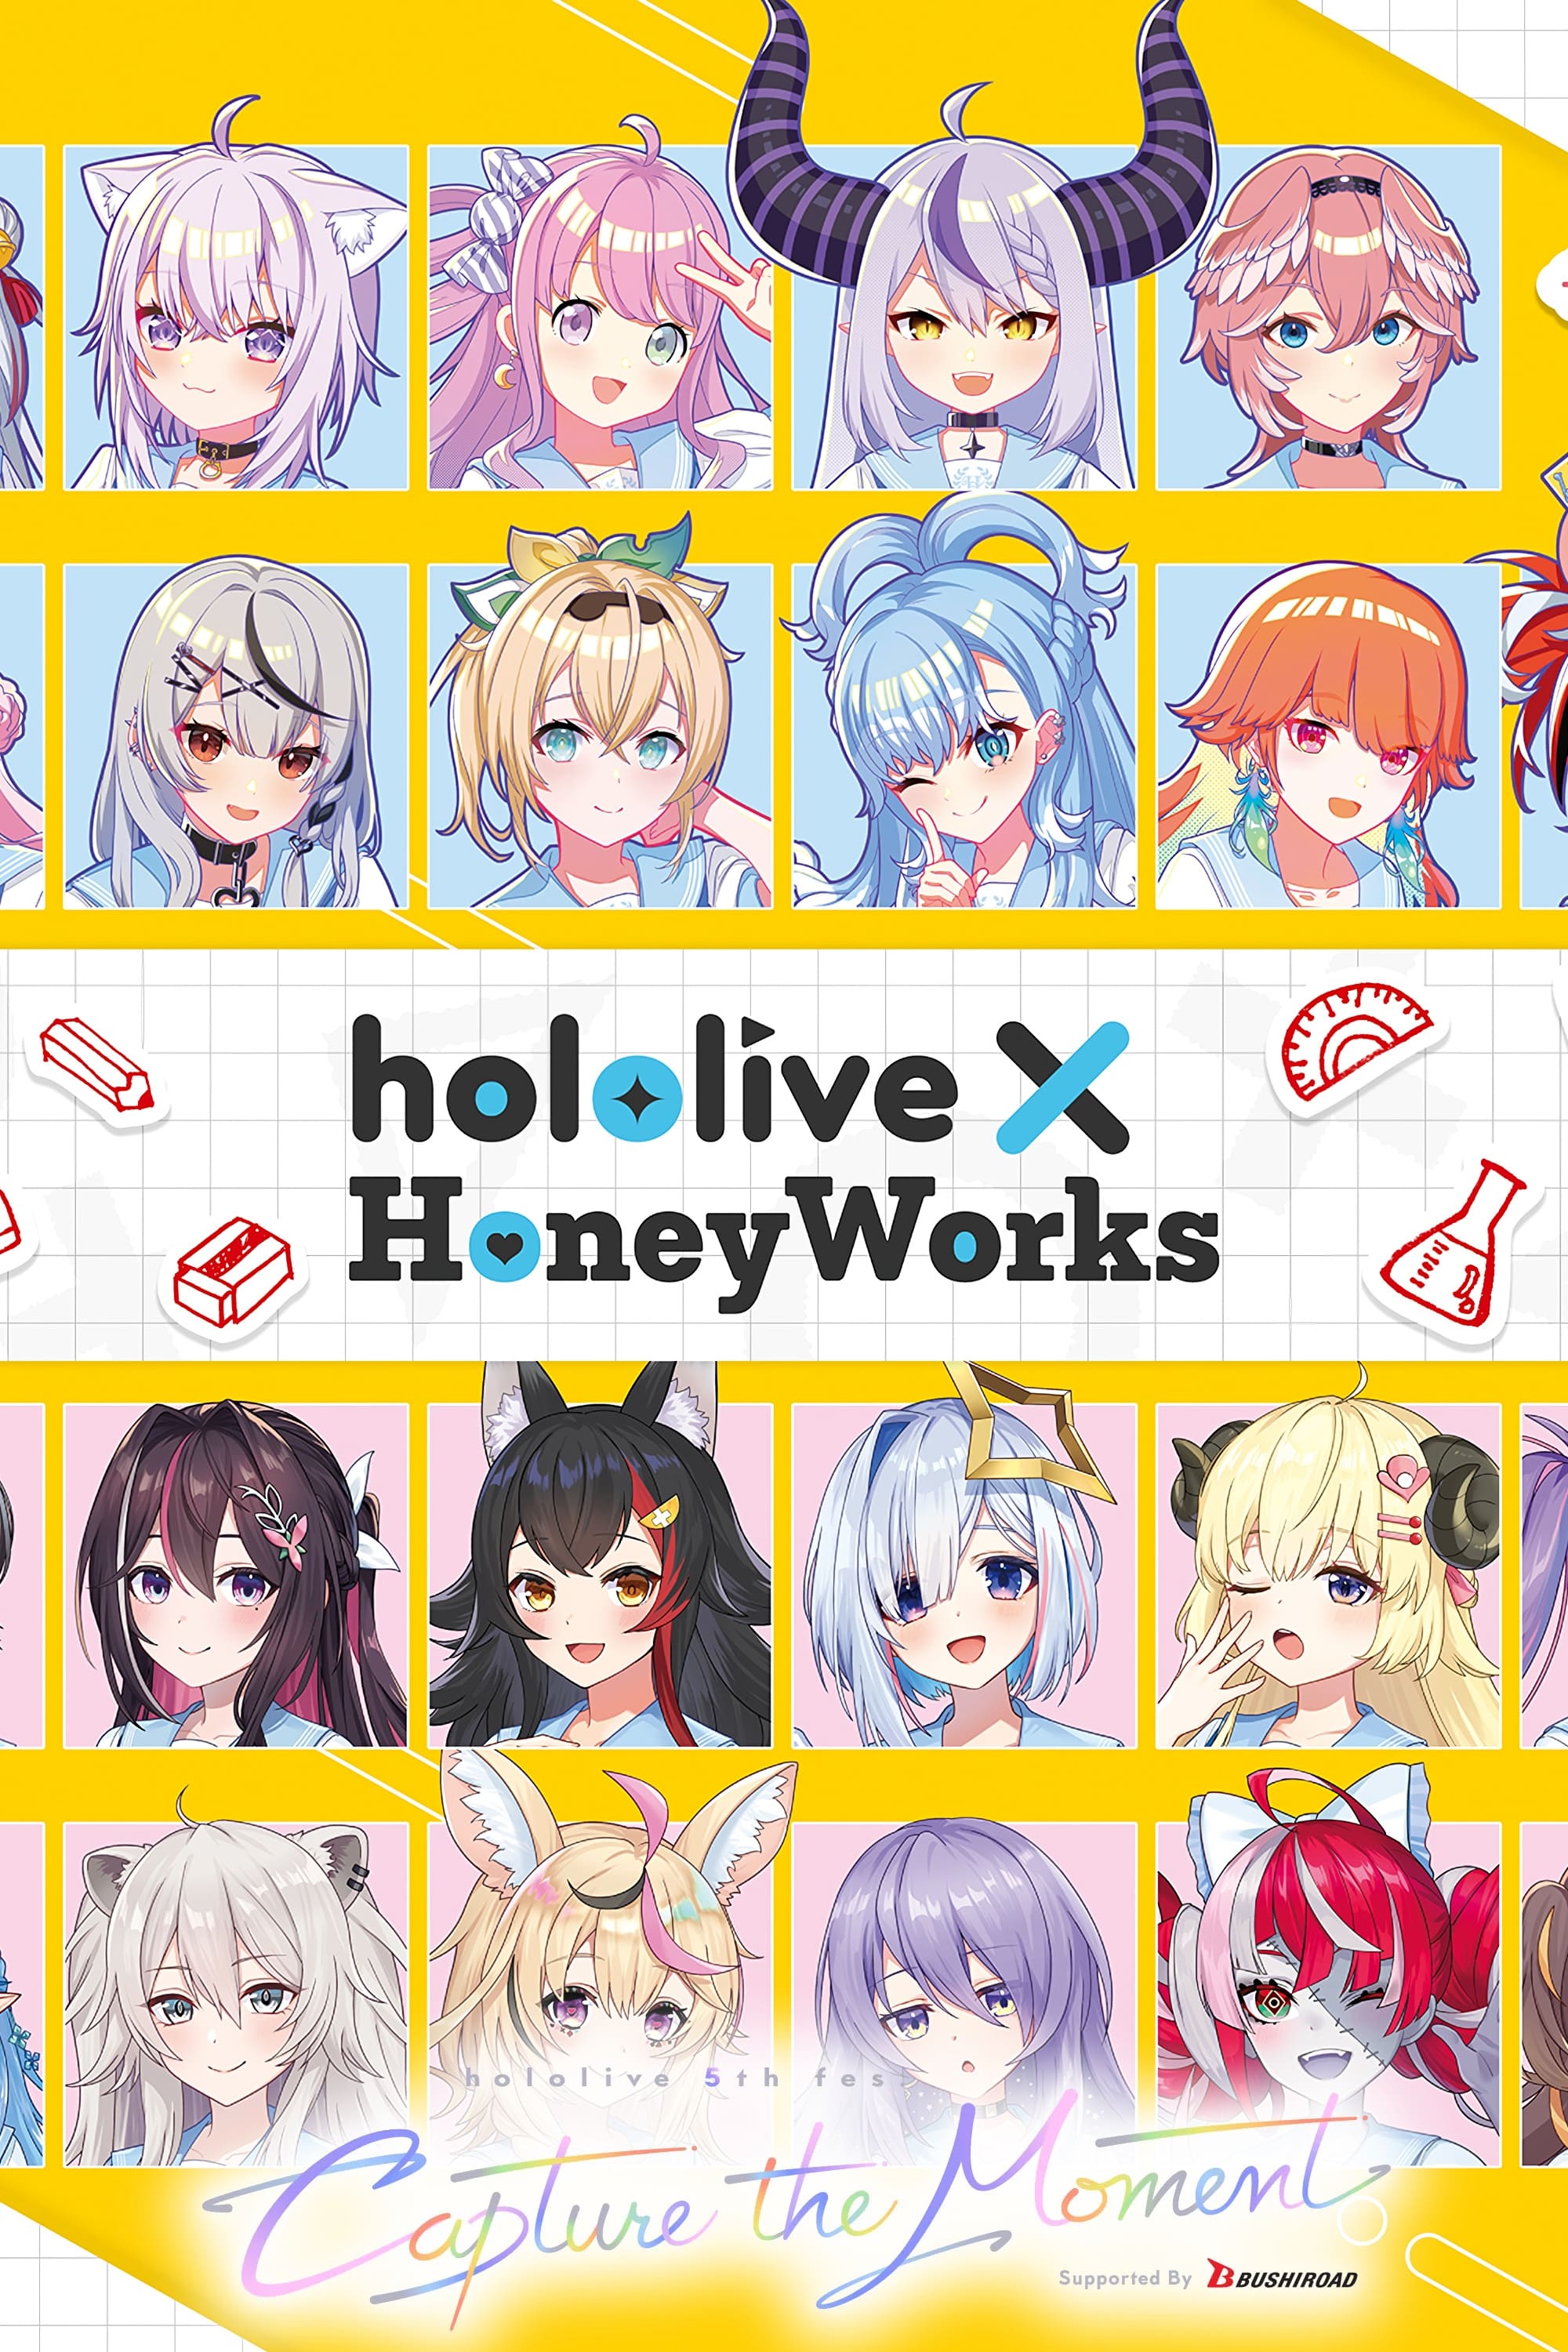 Hololive 5th fes. Capture the Moment Day 2 HoneyWorks Stage